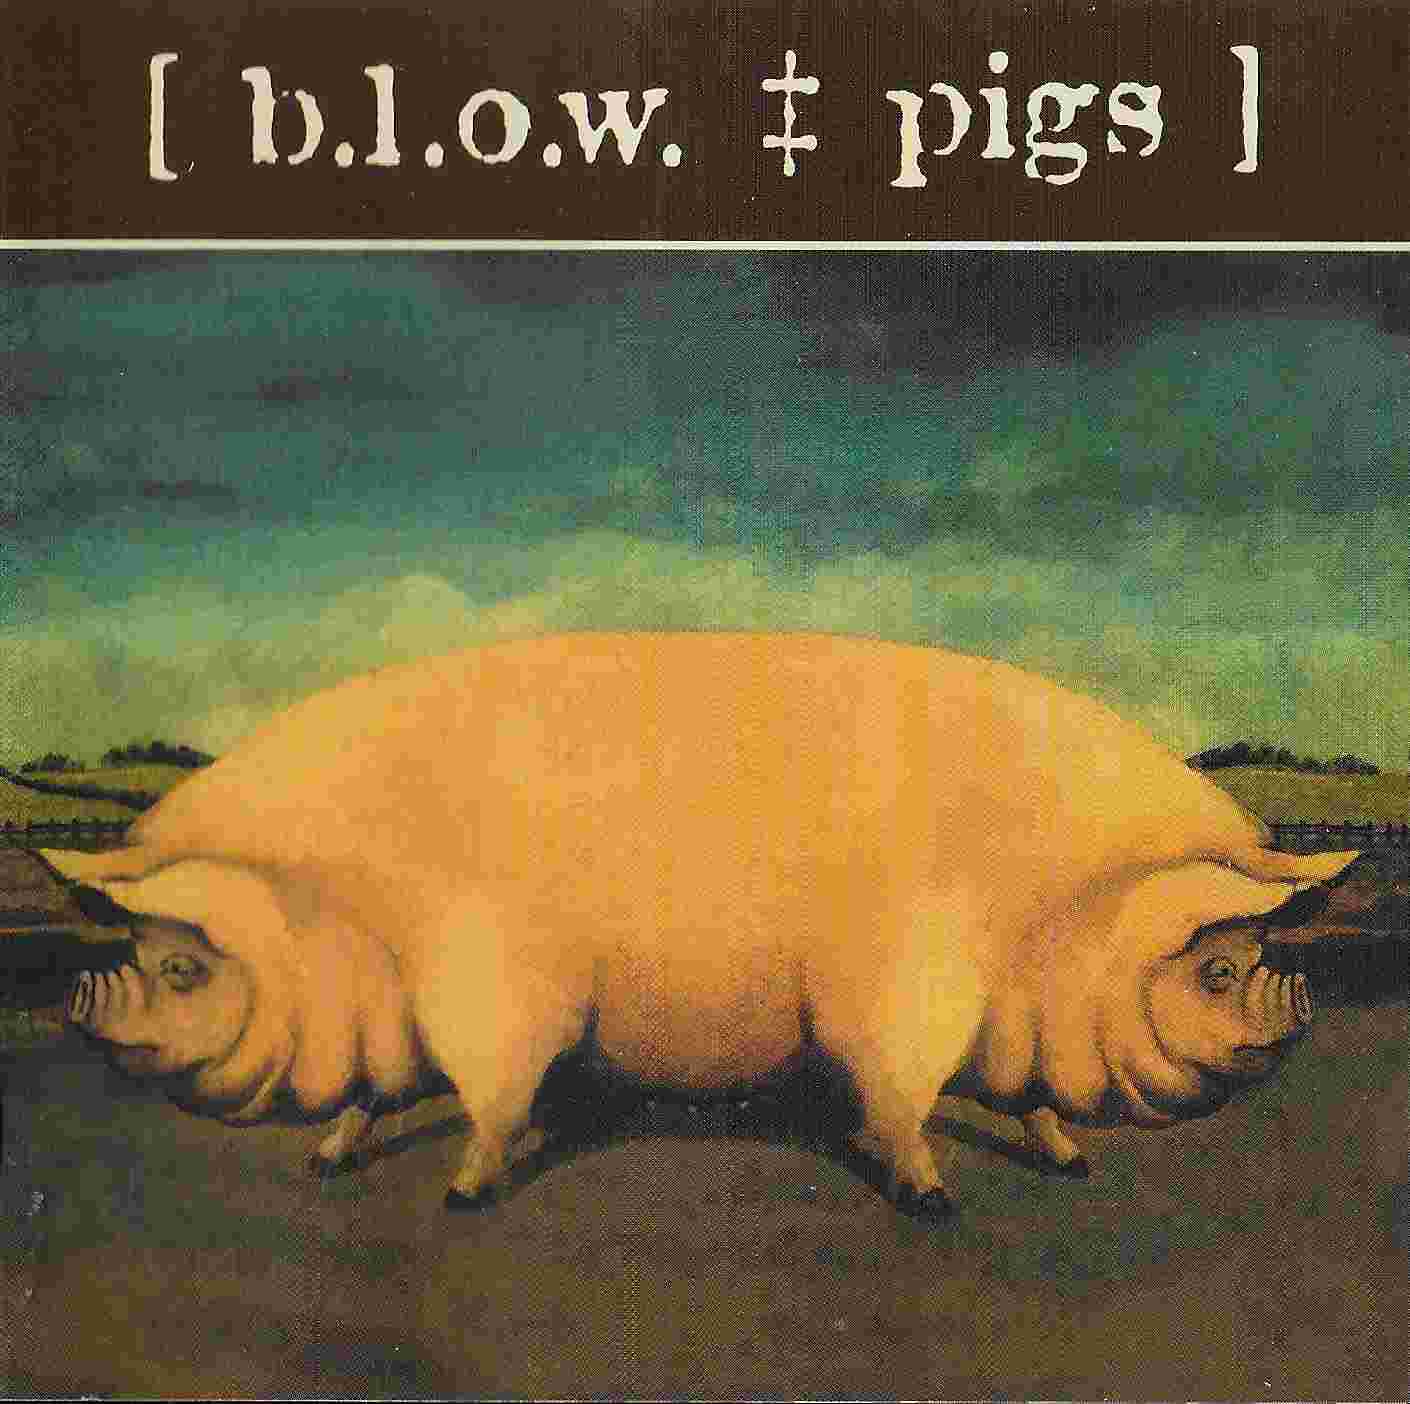 Picture of COTIND CD10 Pigs by artist B. L. O. W. 